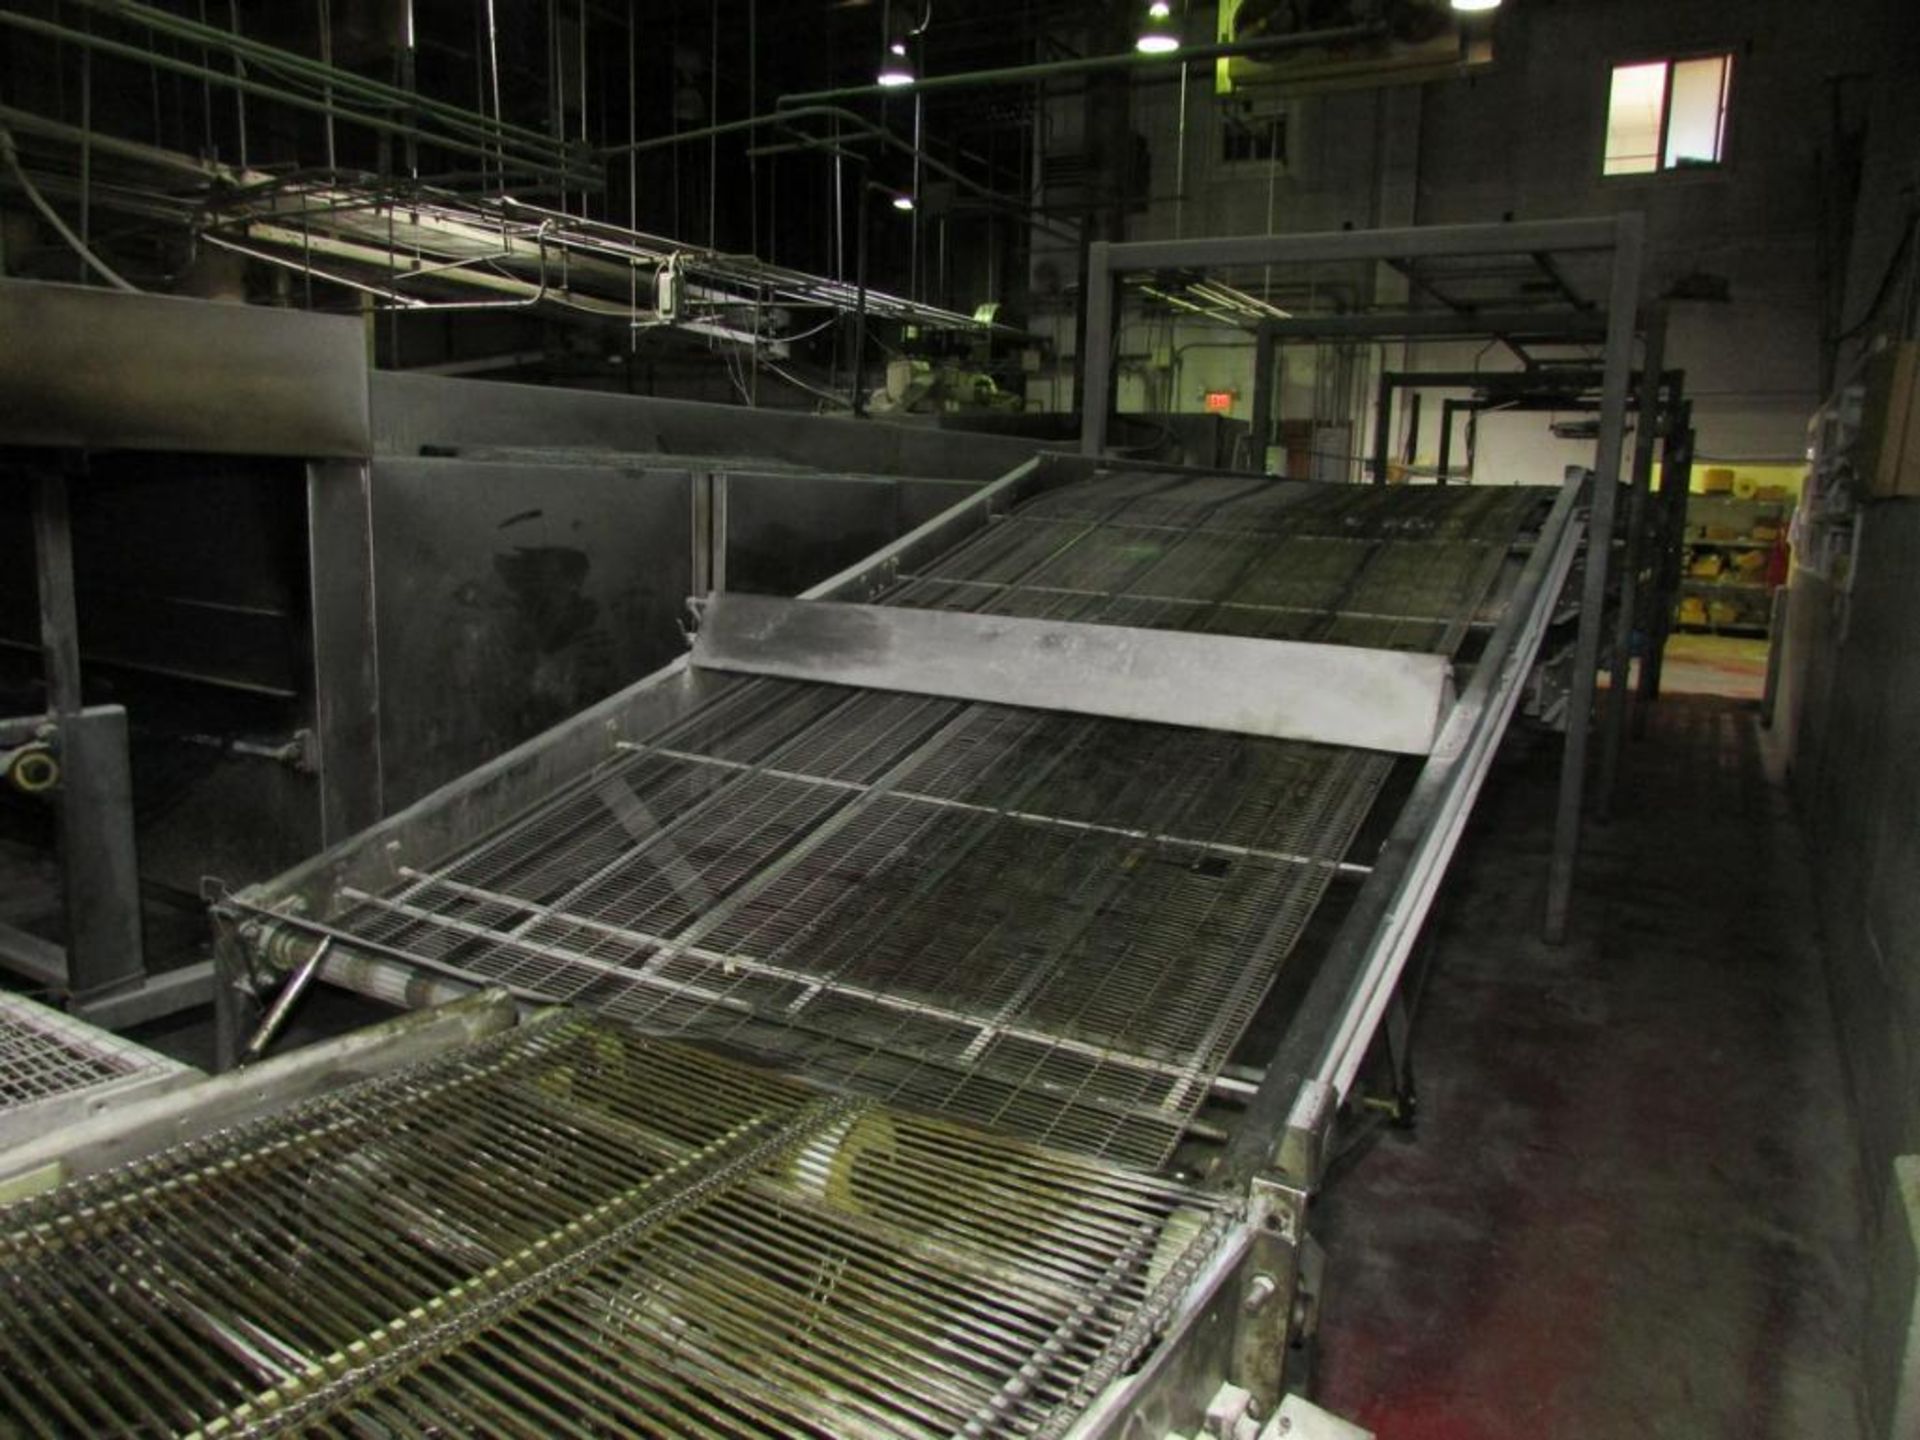 DOC Machine Works 3-Tier 64" W Cooling Conveyor System, Approx 95' Total Length (2) Half Moon Convey - Image 10 of 12